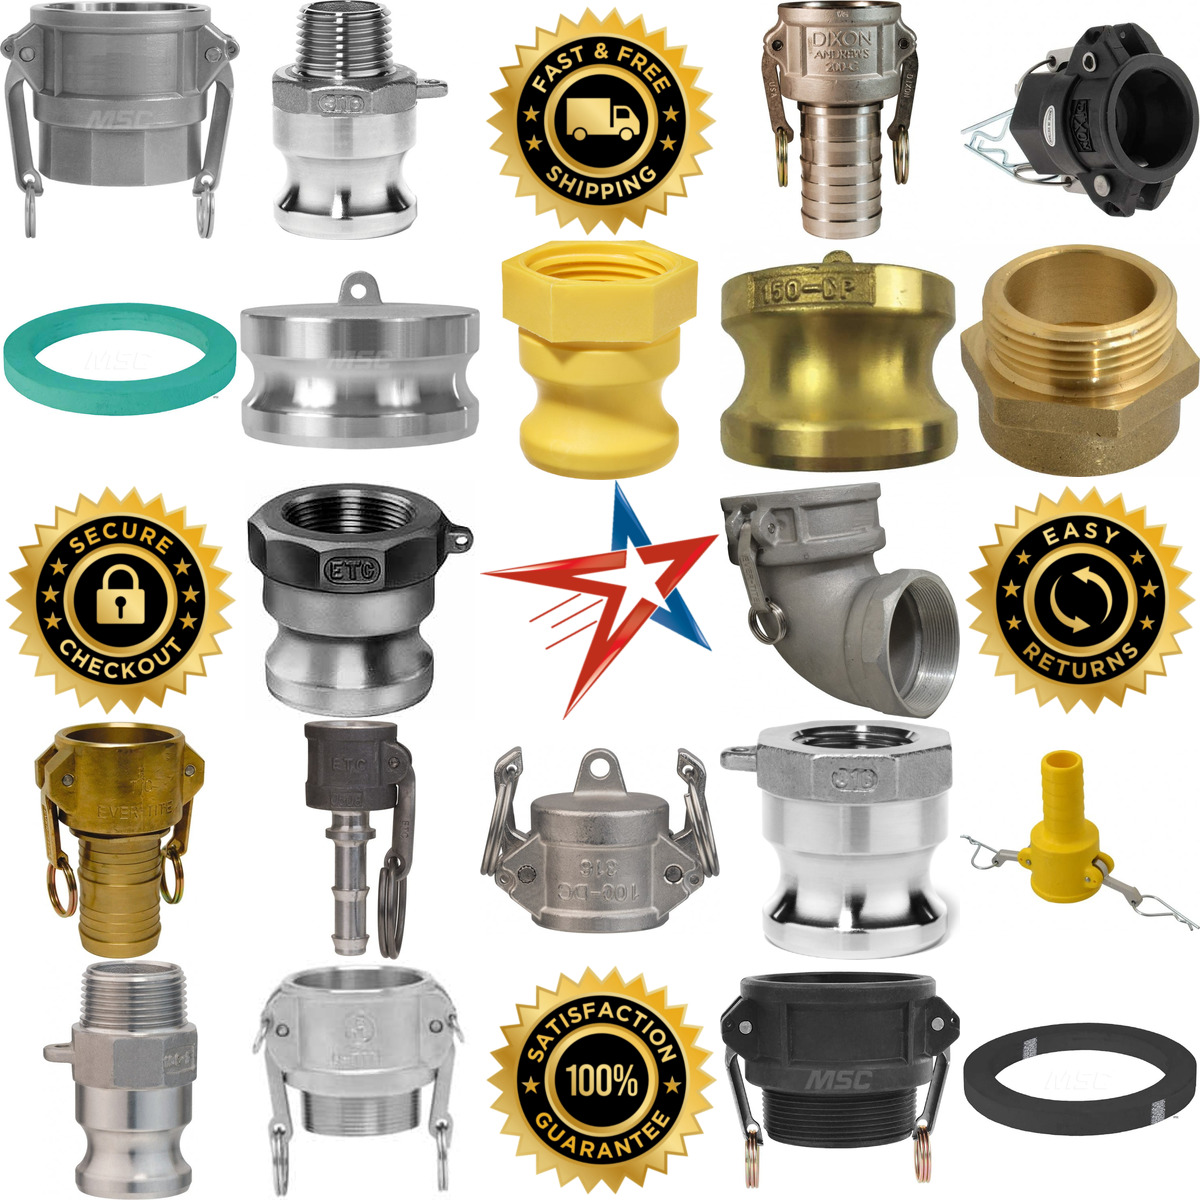 A selection of Hose Couplings products on GoVets